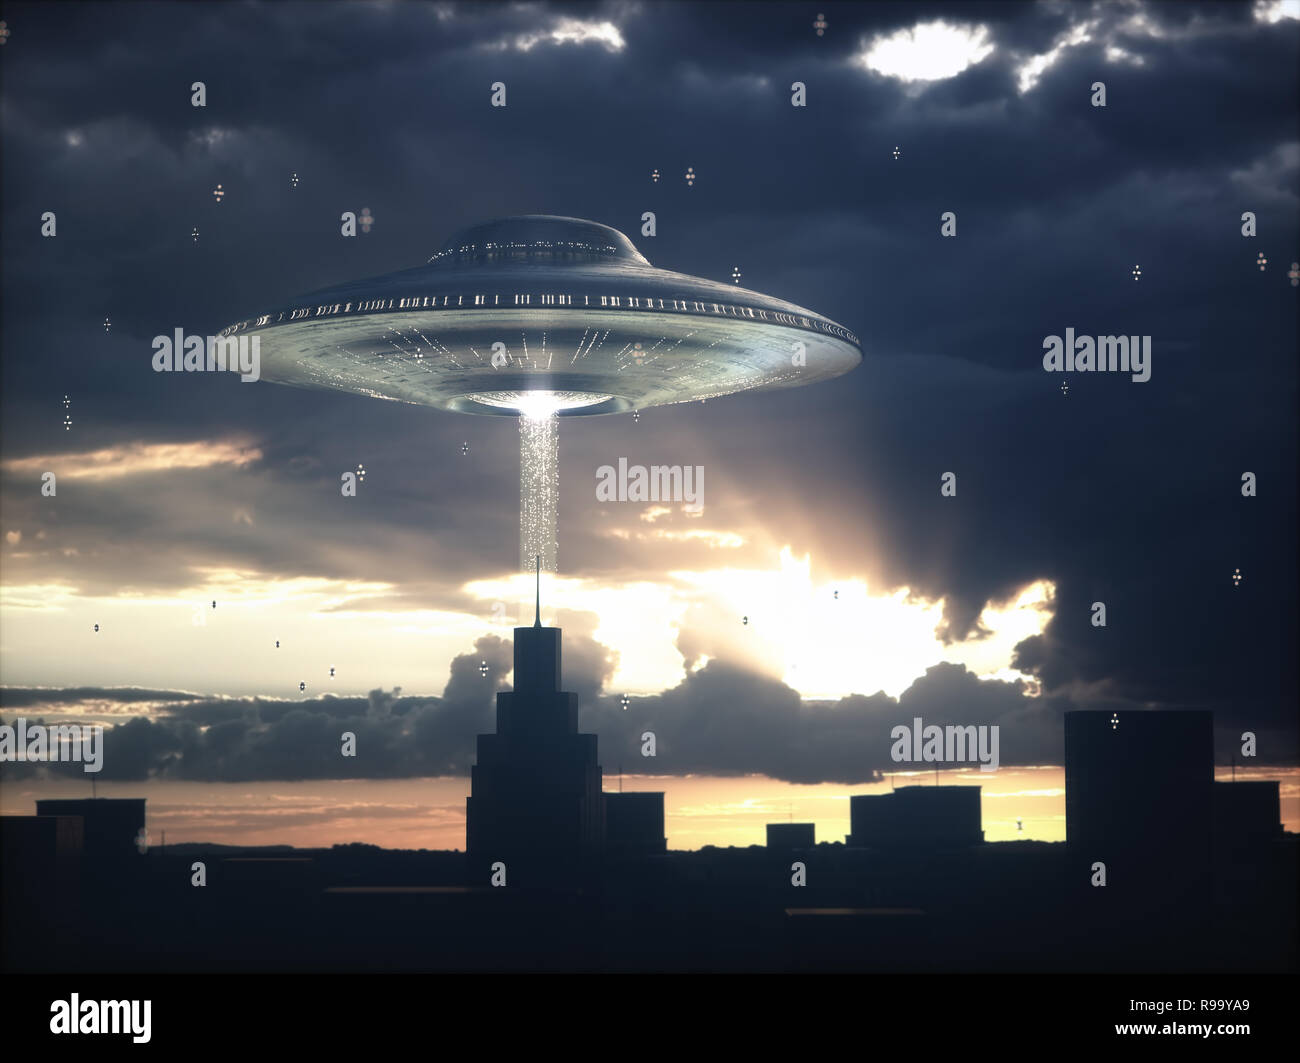 Alien spacecraft flying over building at sunset. Image concept of alien invasion. Stock Photo